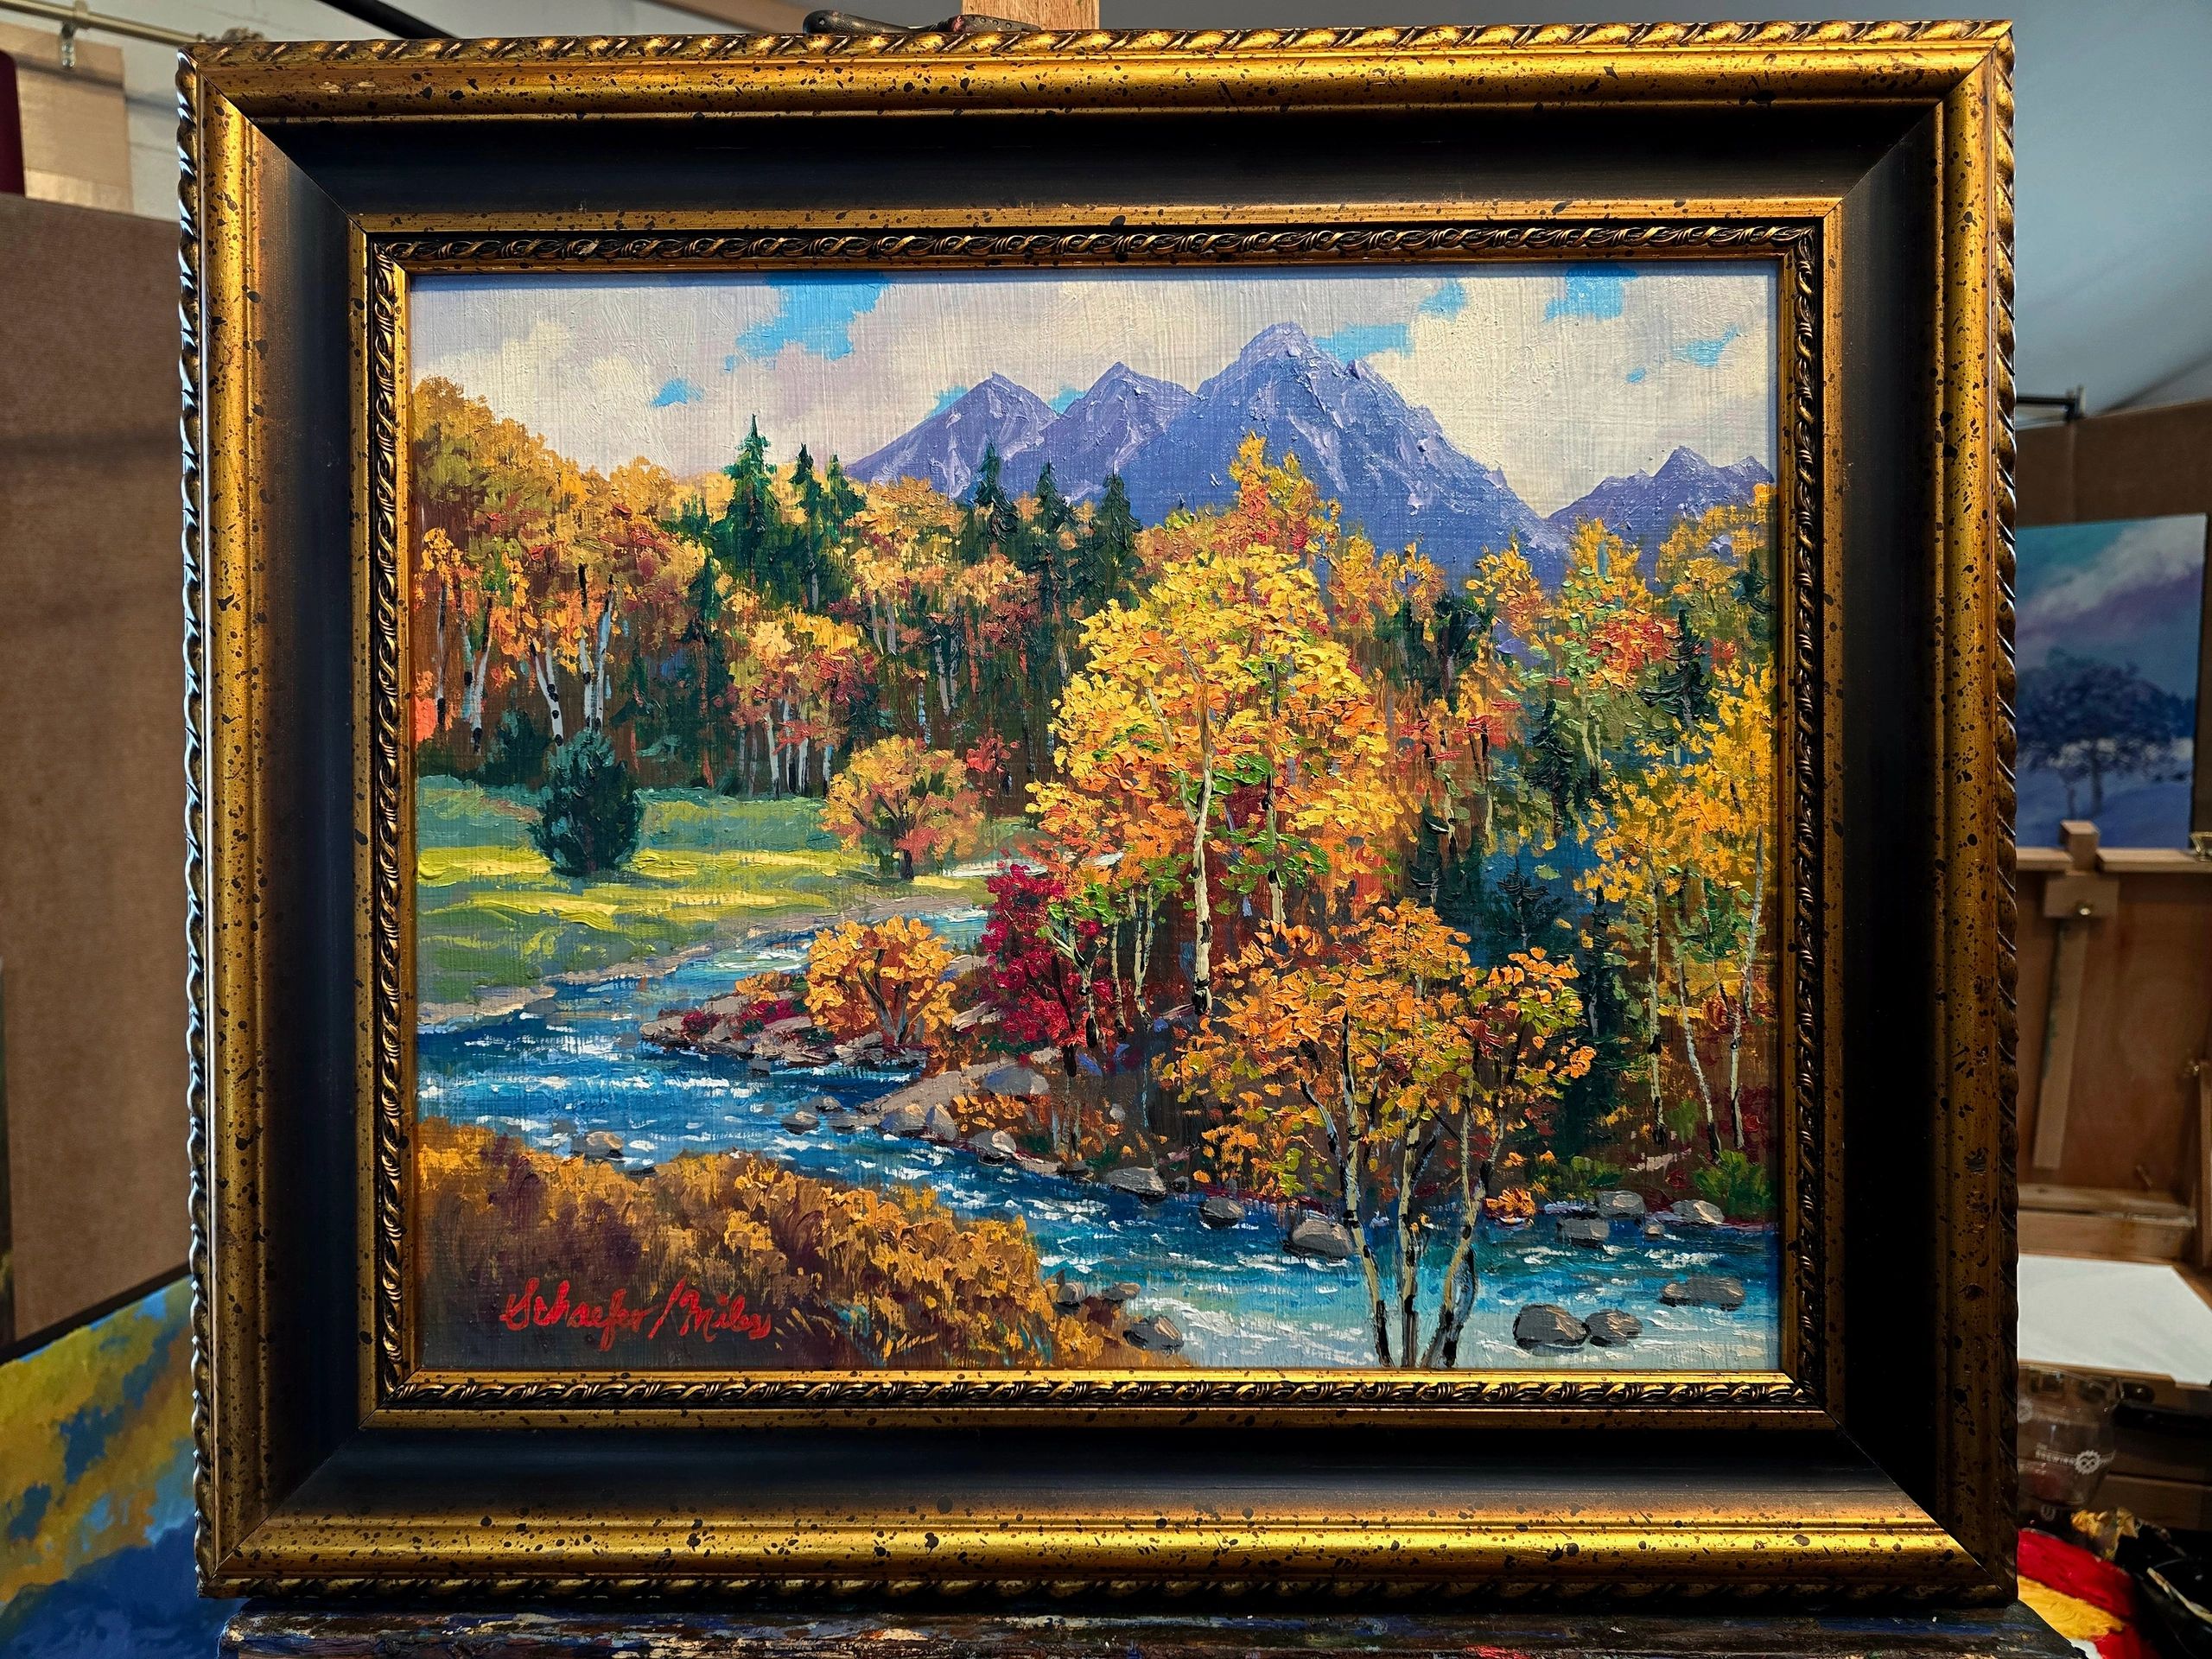 Old Fall River Road is an Original oil painting of pristine mountains and fall colors along a stream